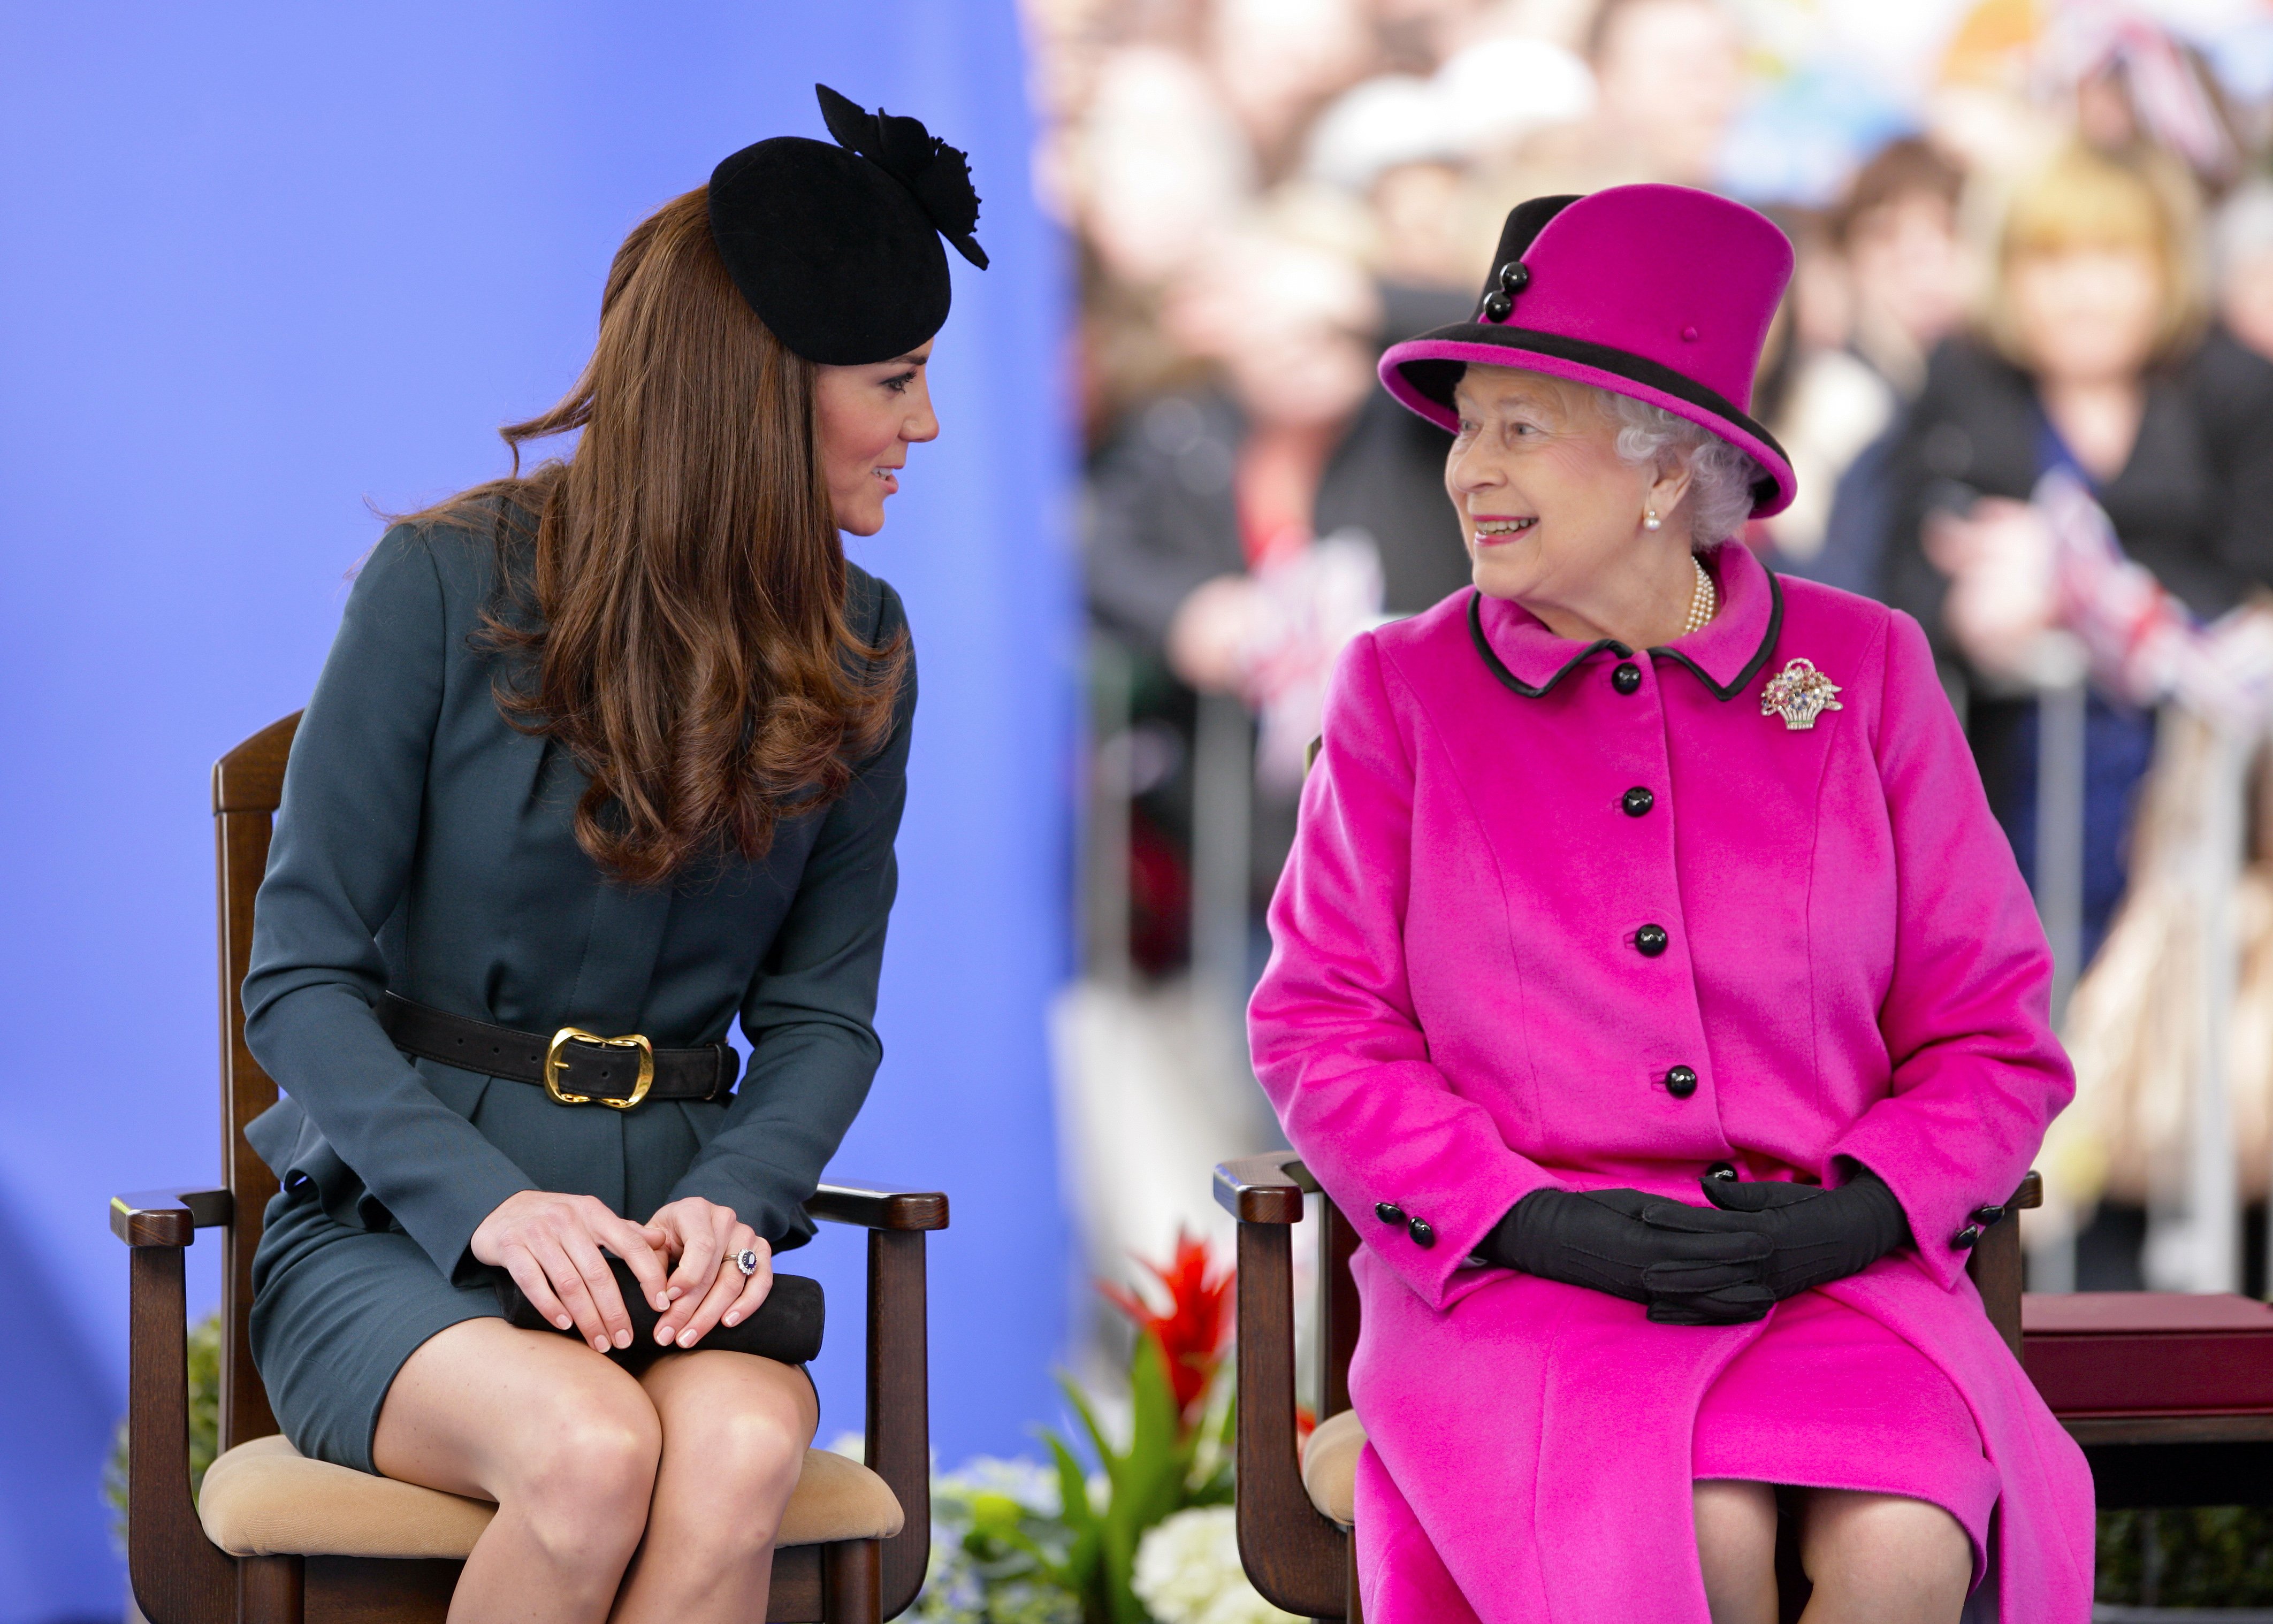 Kate Middleton and Queen Elizabeth II Leicester, England 2012. | Source: Getty Images